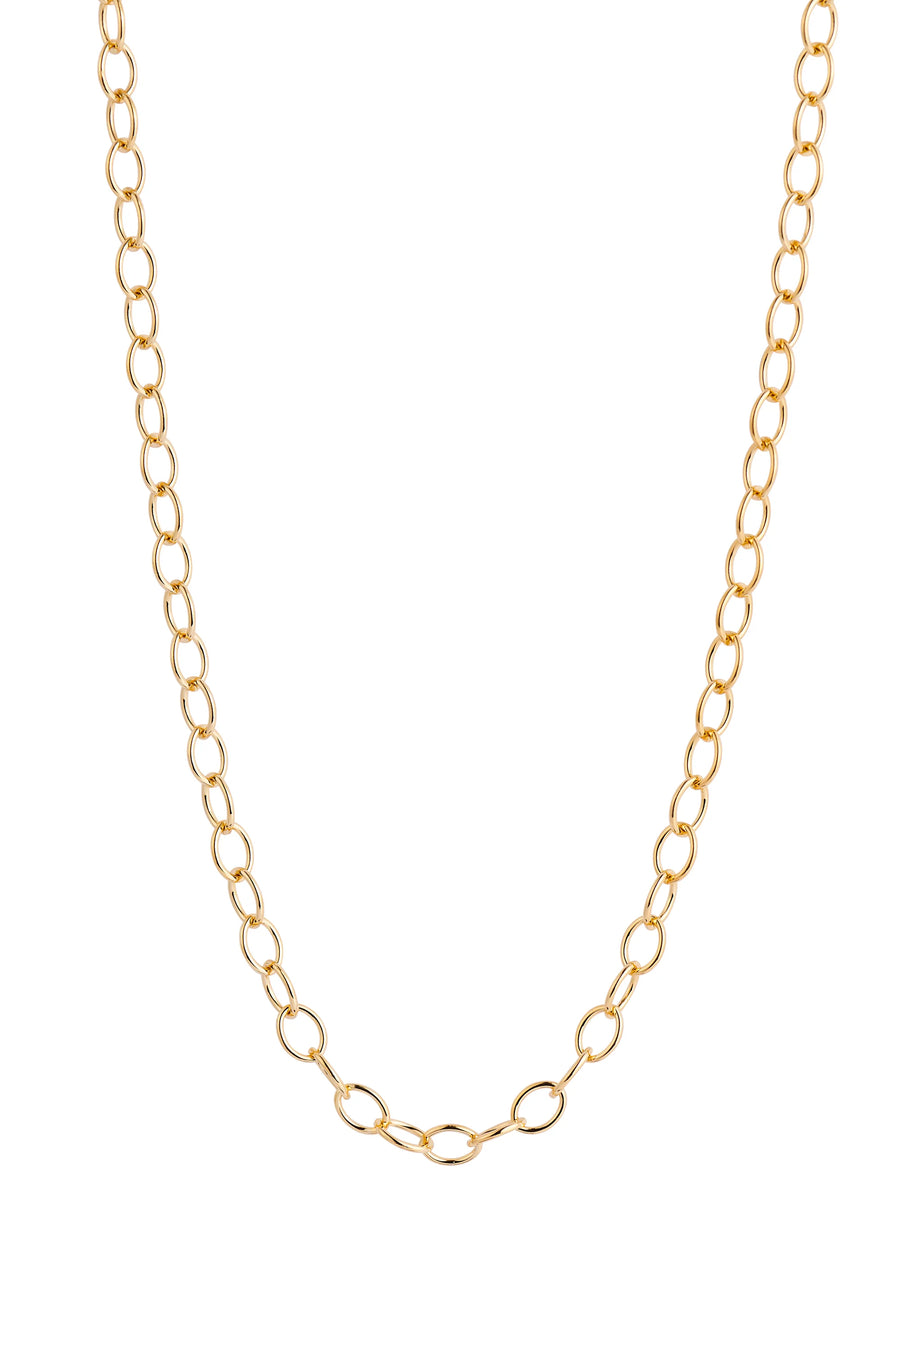 LISBETH JEWELRY - COLLIER MARIE - OR REMPLI